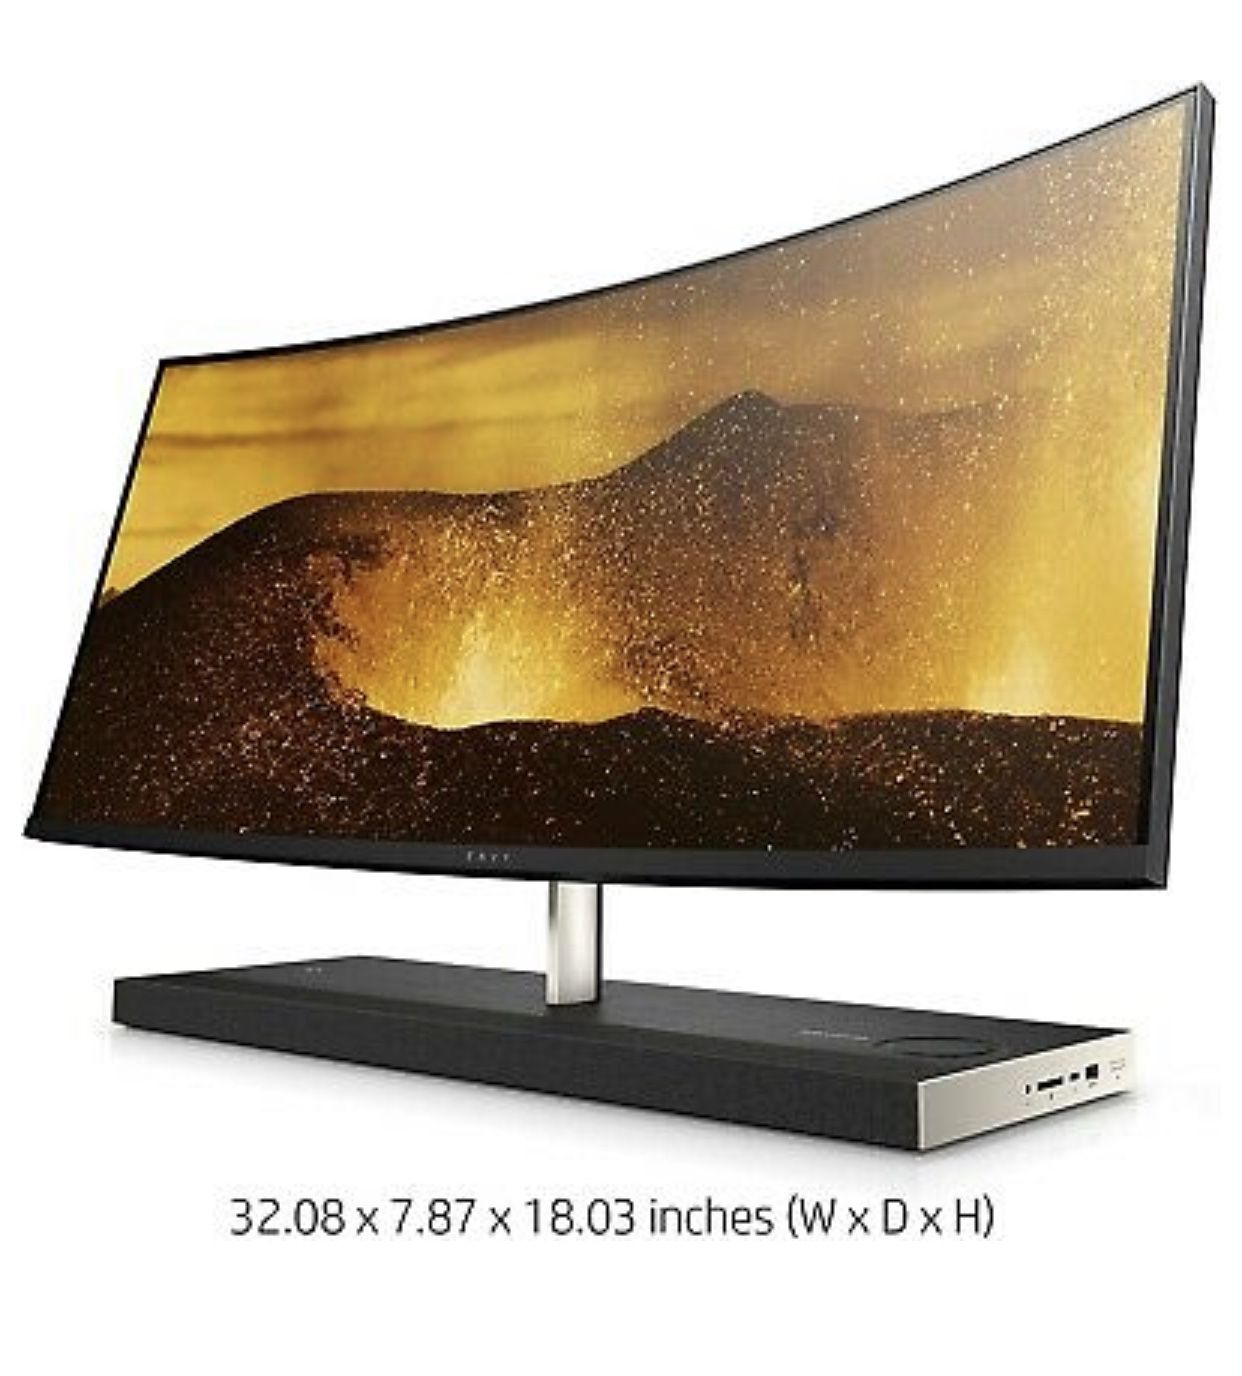 HP ENVY 34-inch Curved All-in-One Computer i7-9th Gen